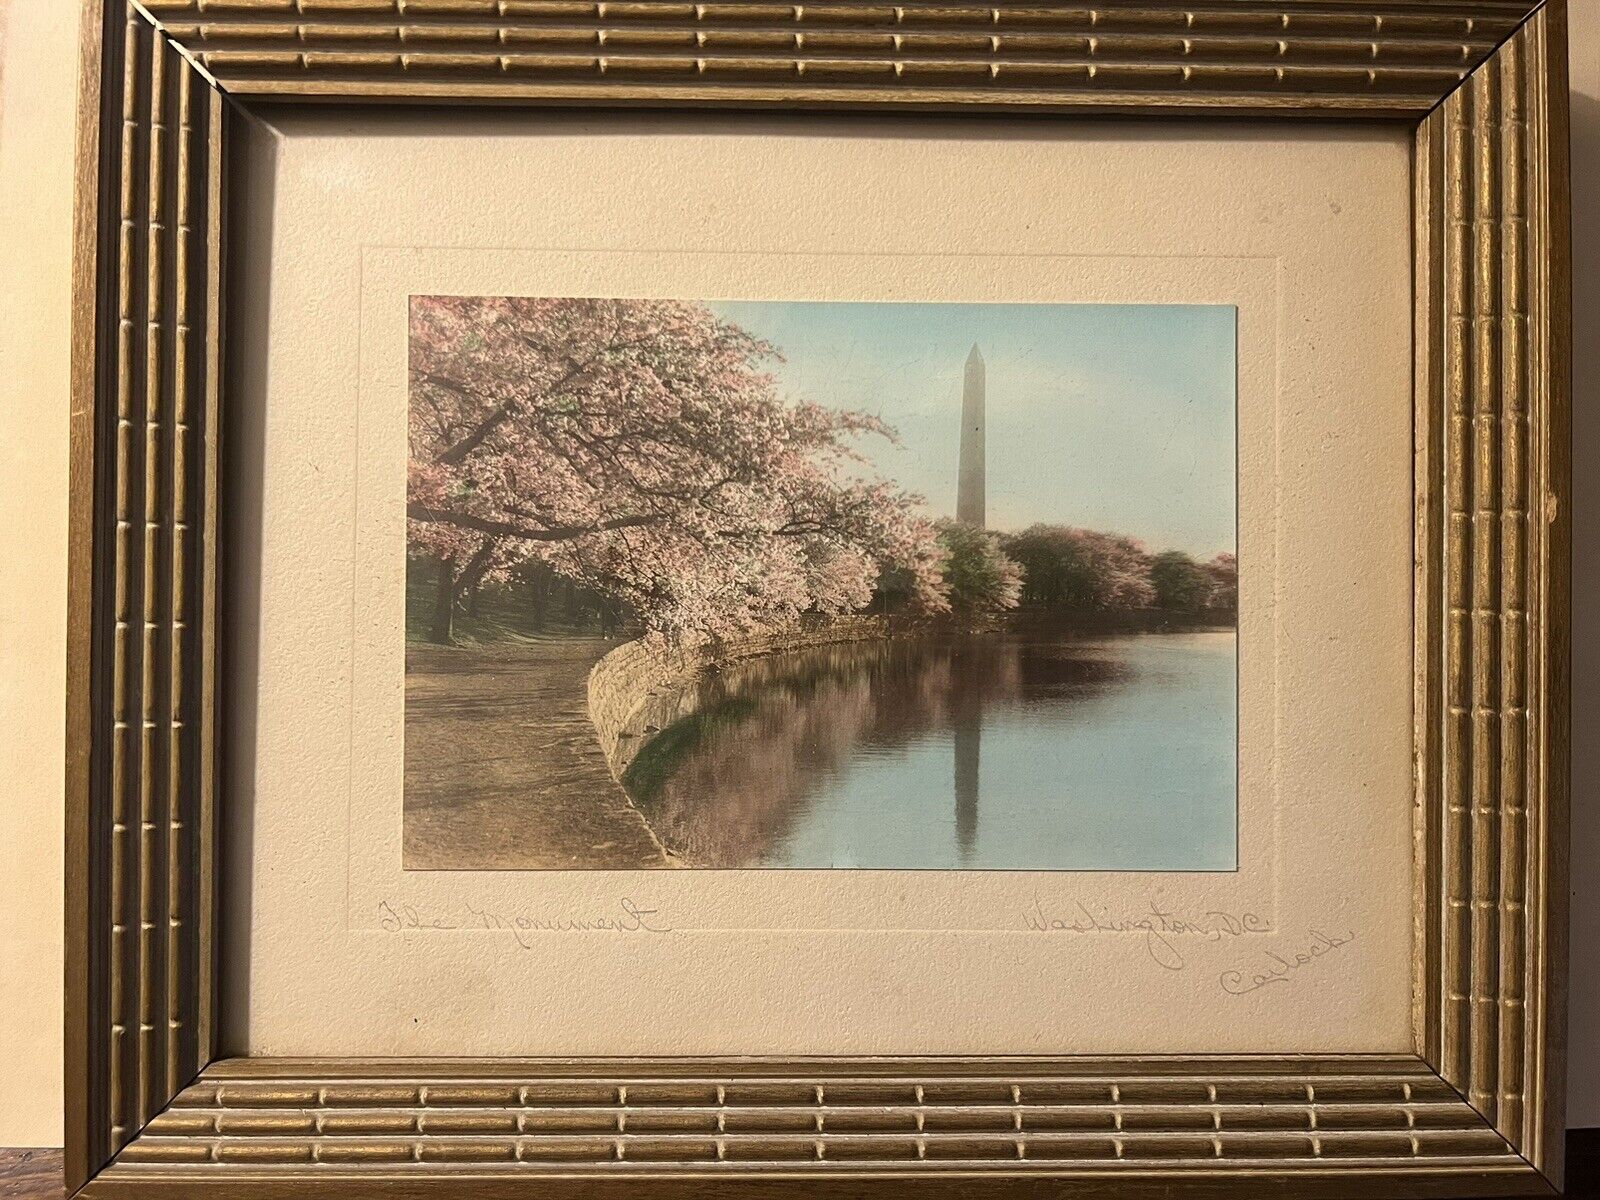 Rare Royal A. Carlock signed Framed Photograph - National Monument Cherry Trees